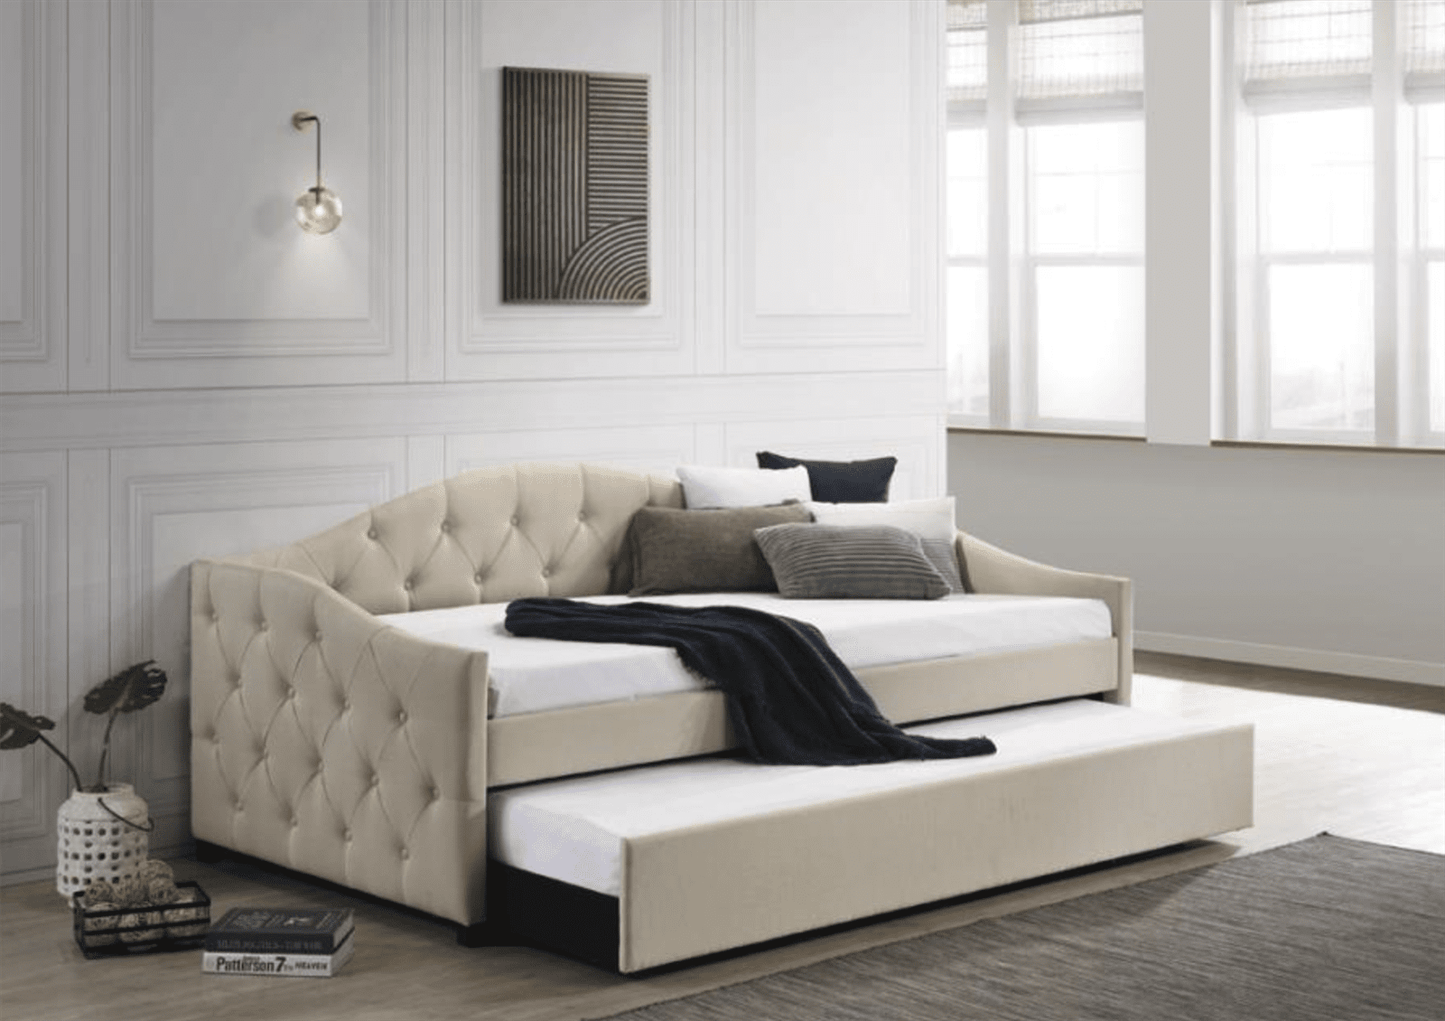 Sadie Camelback Daybed & Trundle in Taupe Woven Fabric